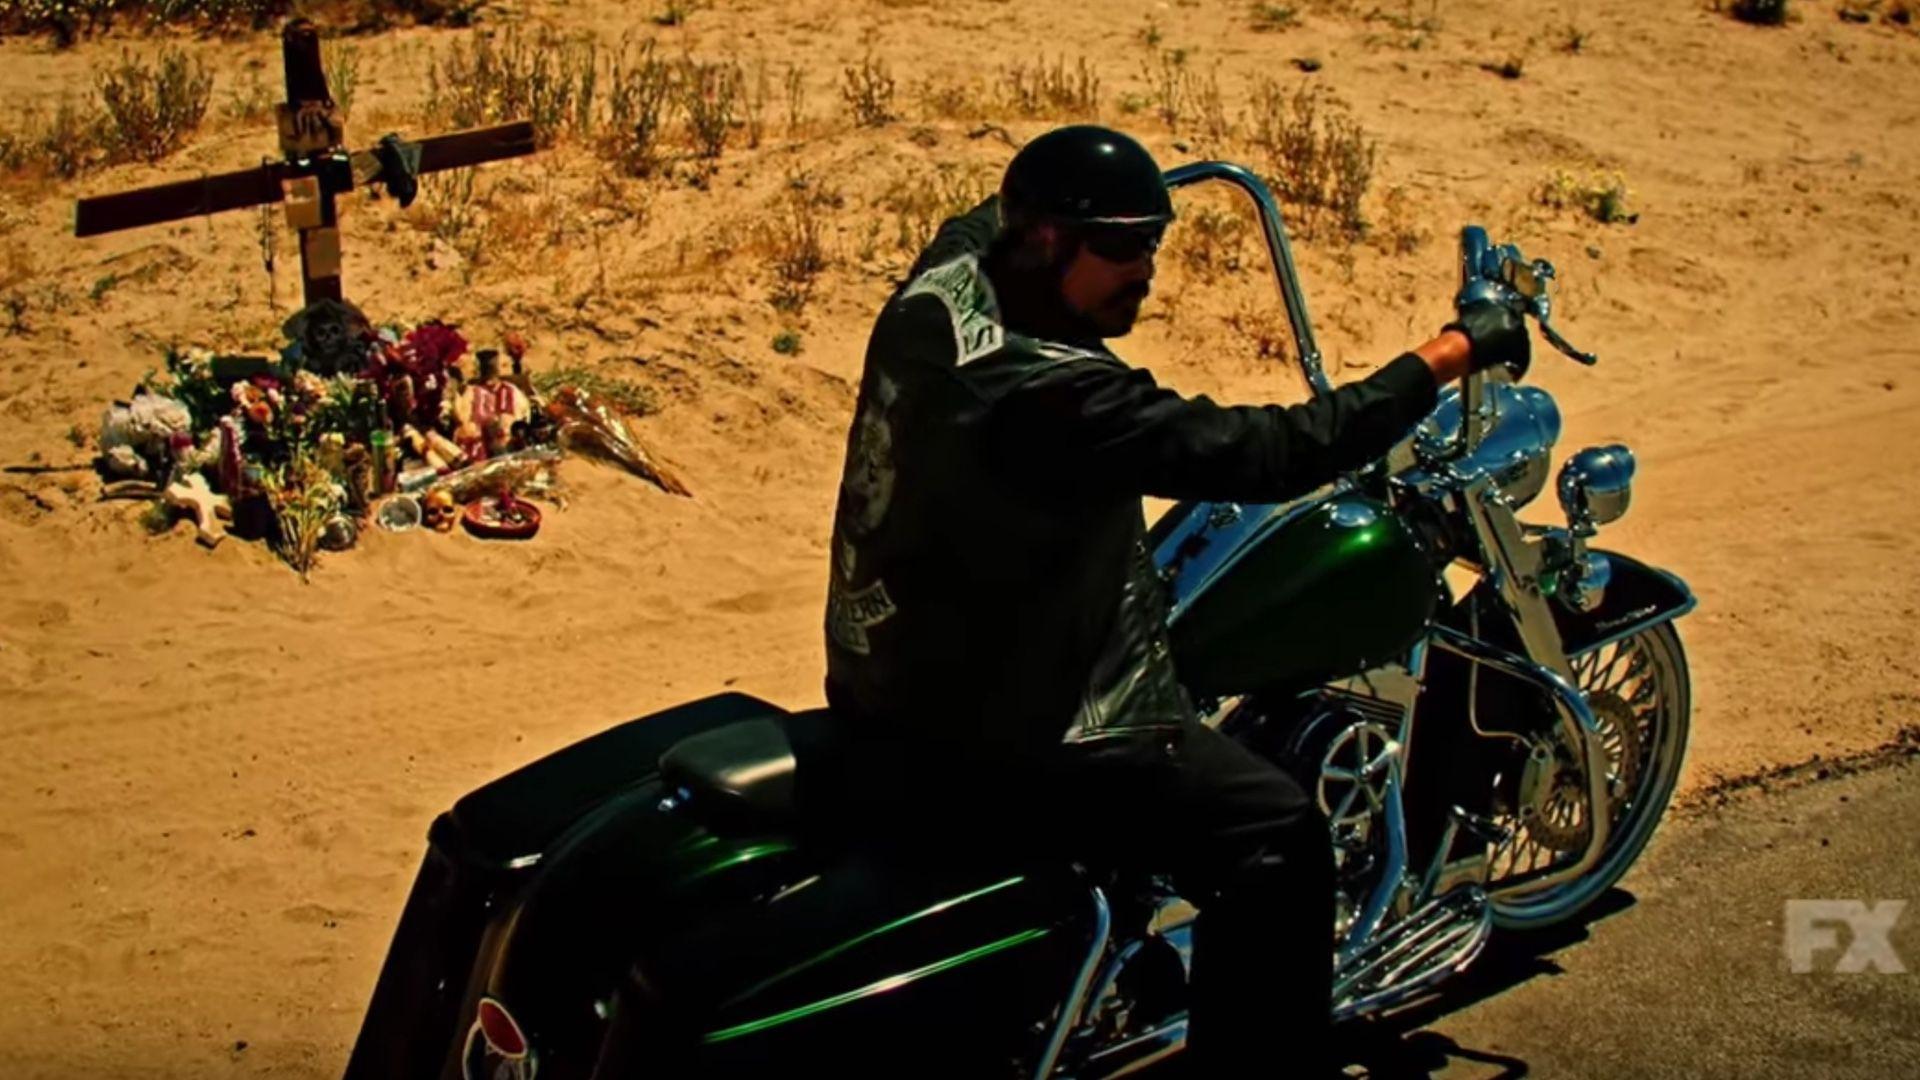 New MAYANS MC Promo Pays Tribute to SONS OF ANARCHY's Jax Teller